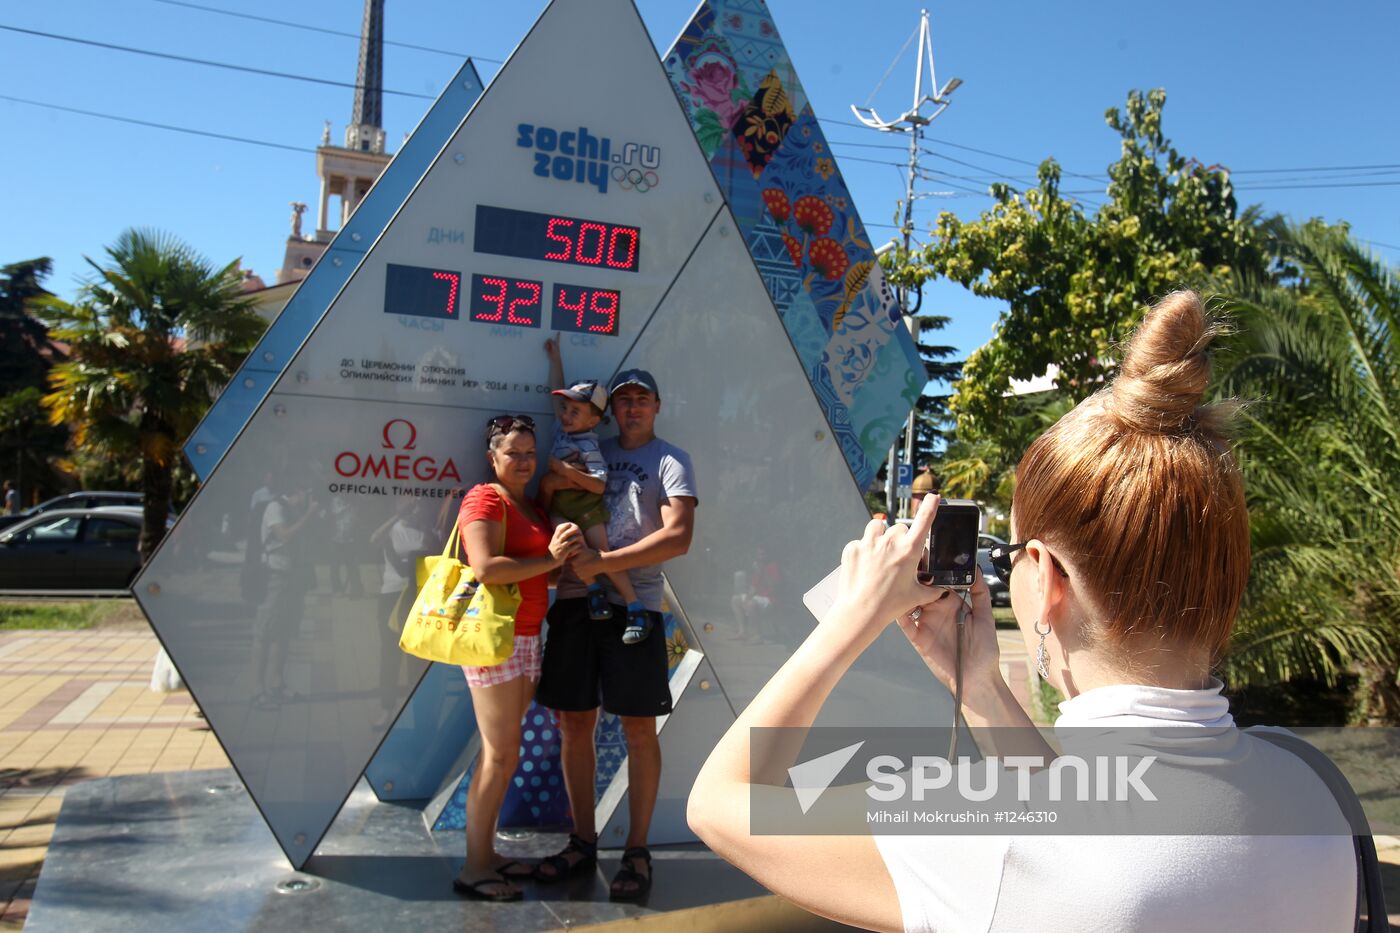 500 days prior to the 22nd Olympic Winter Games in Sochi